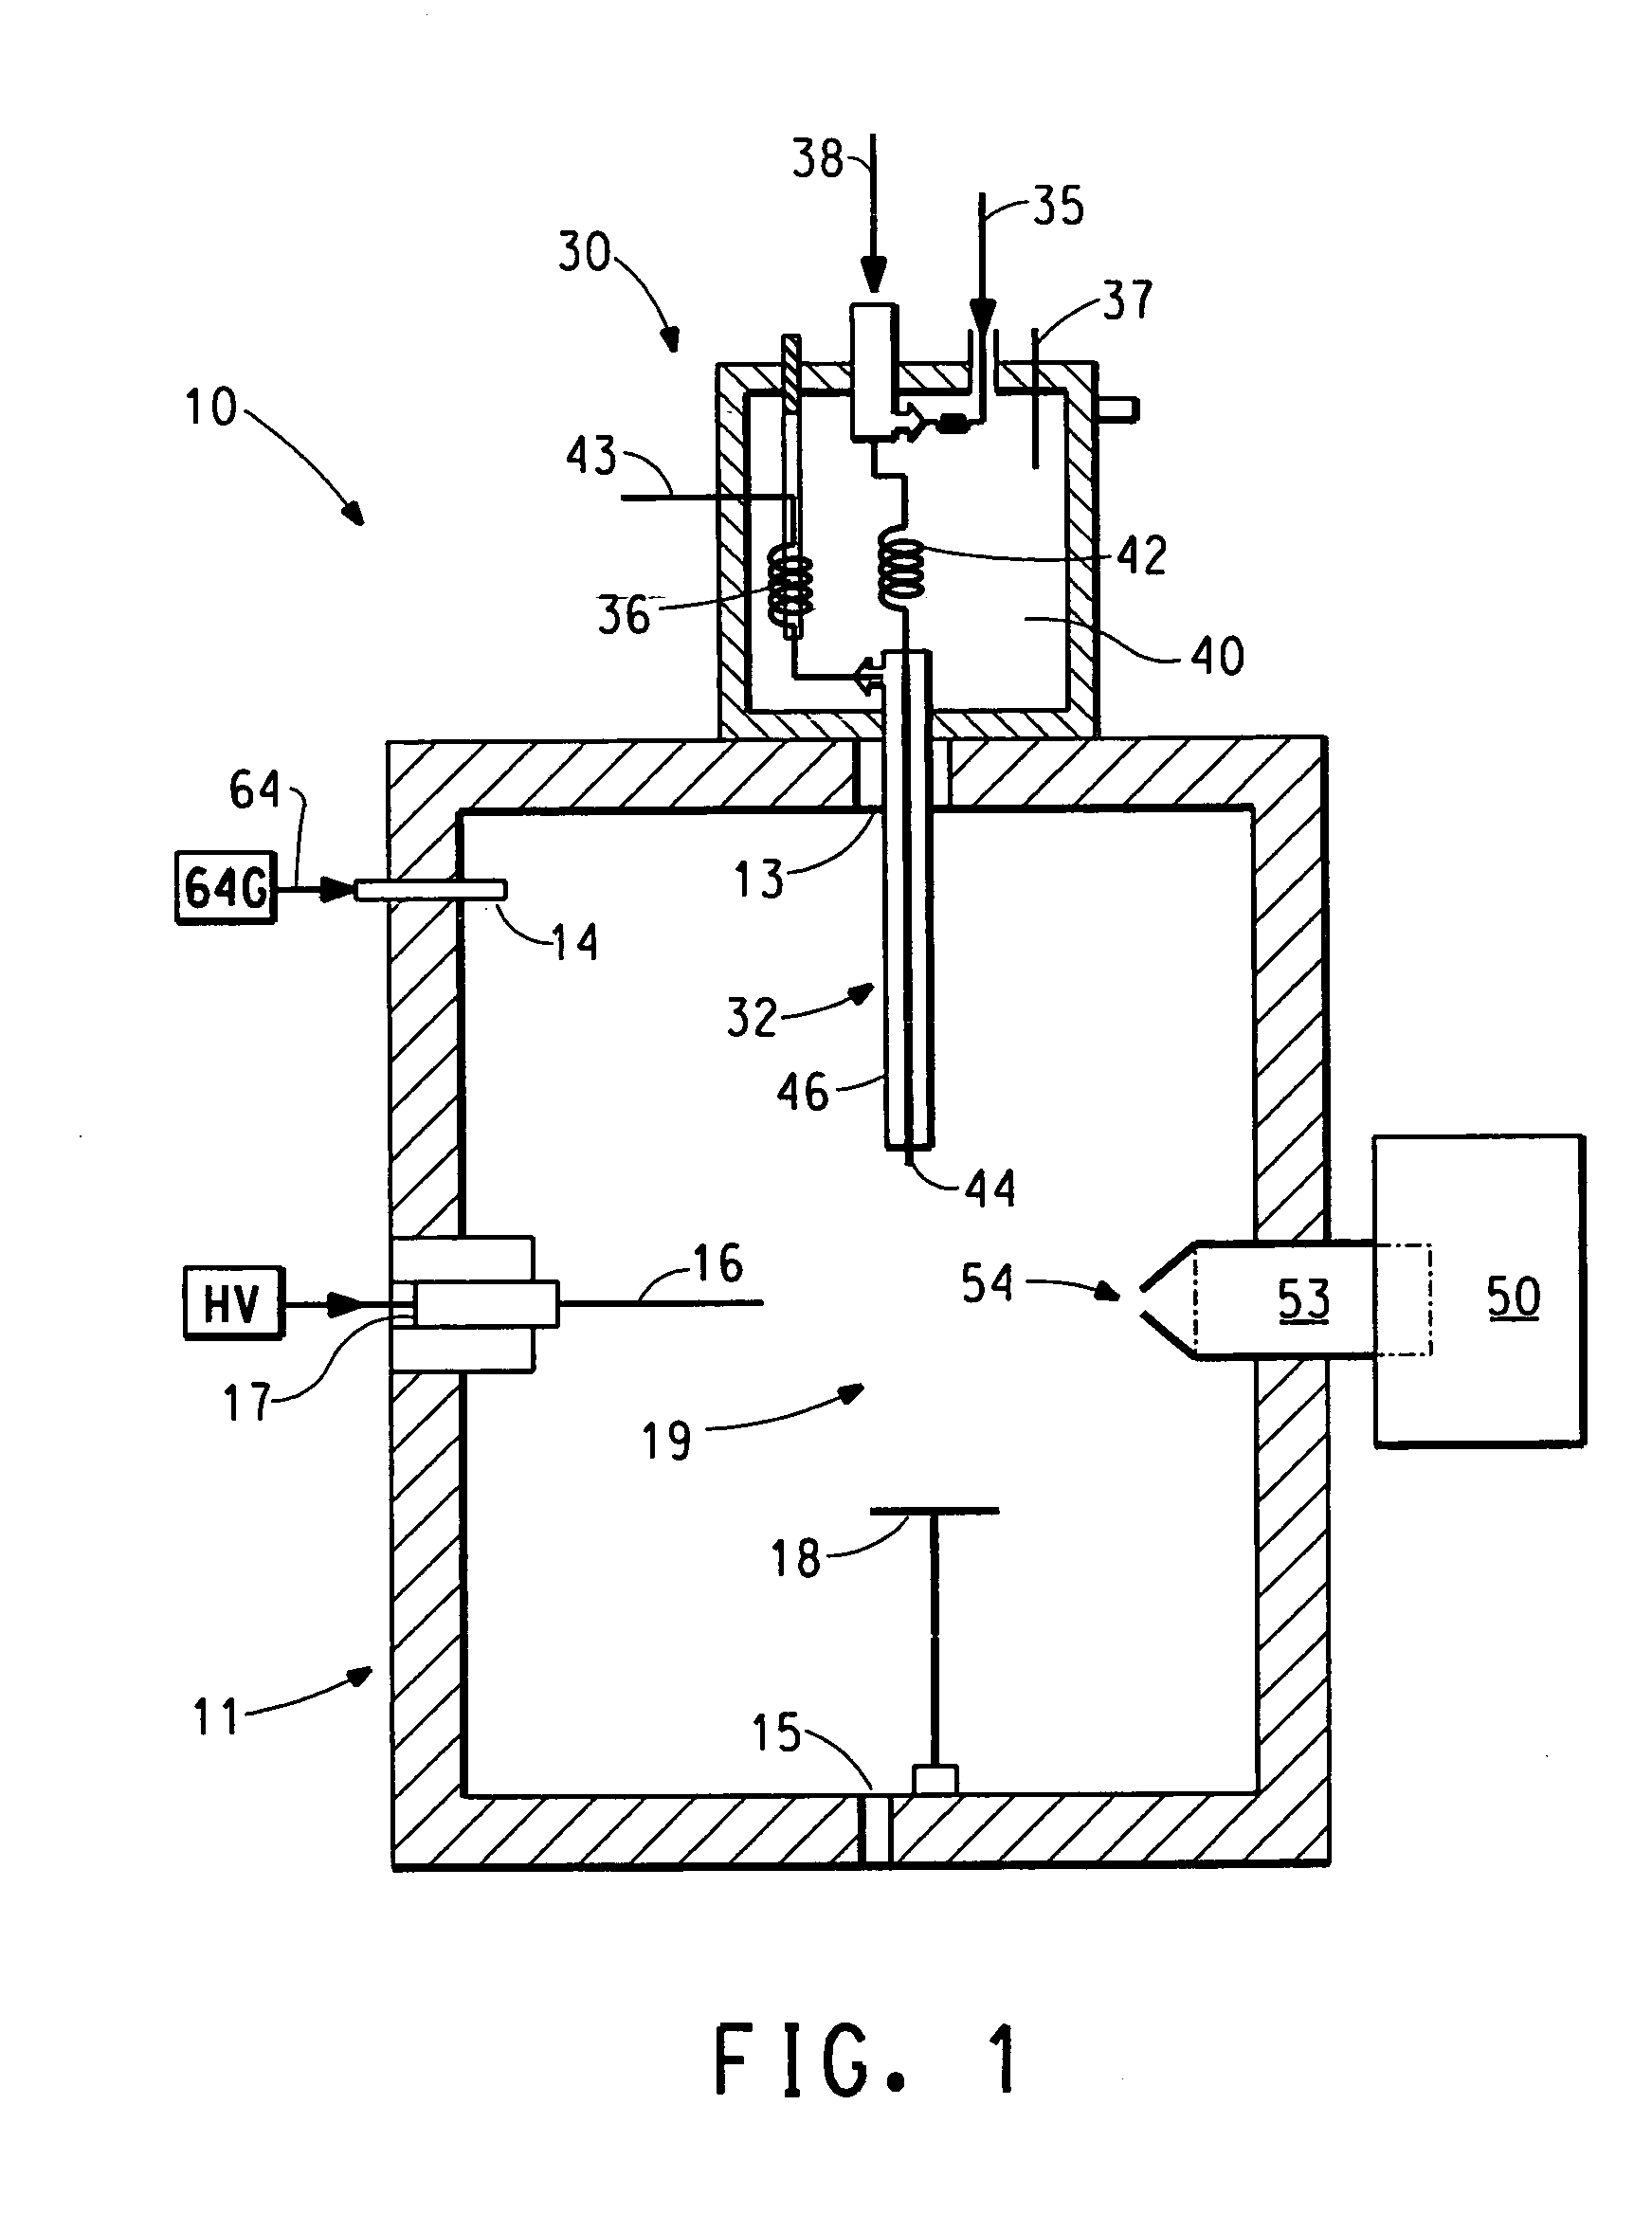 Ion source for a mass spectrometer